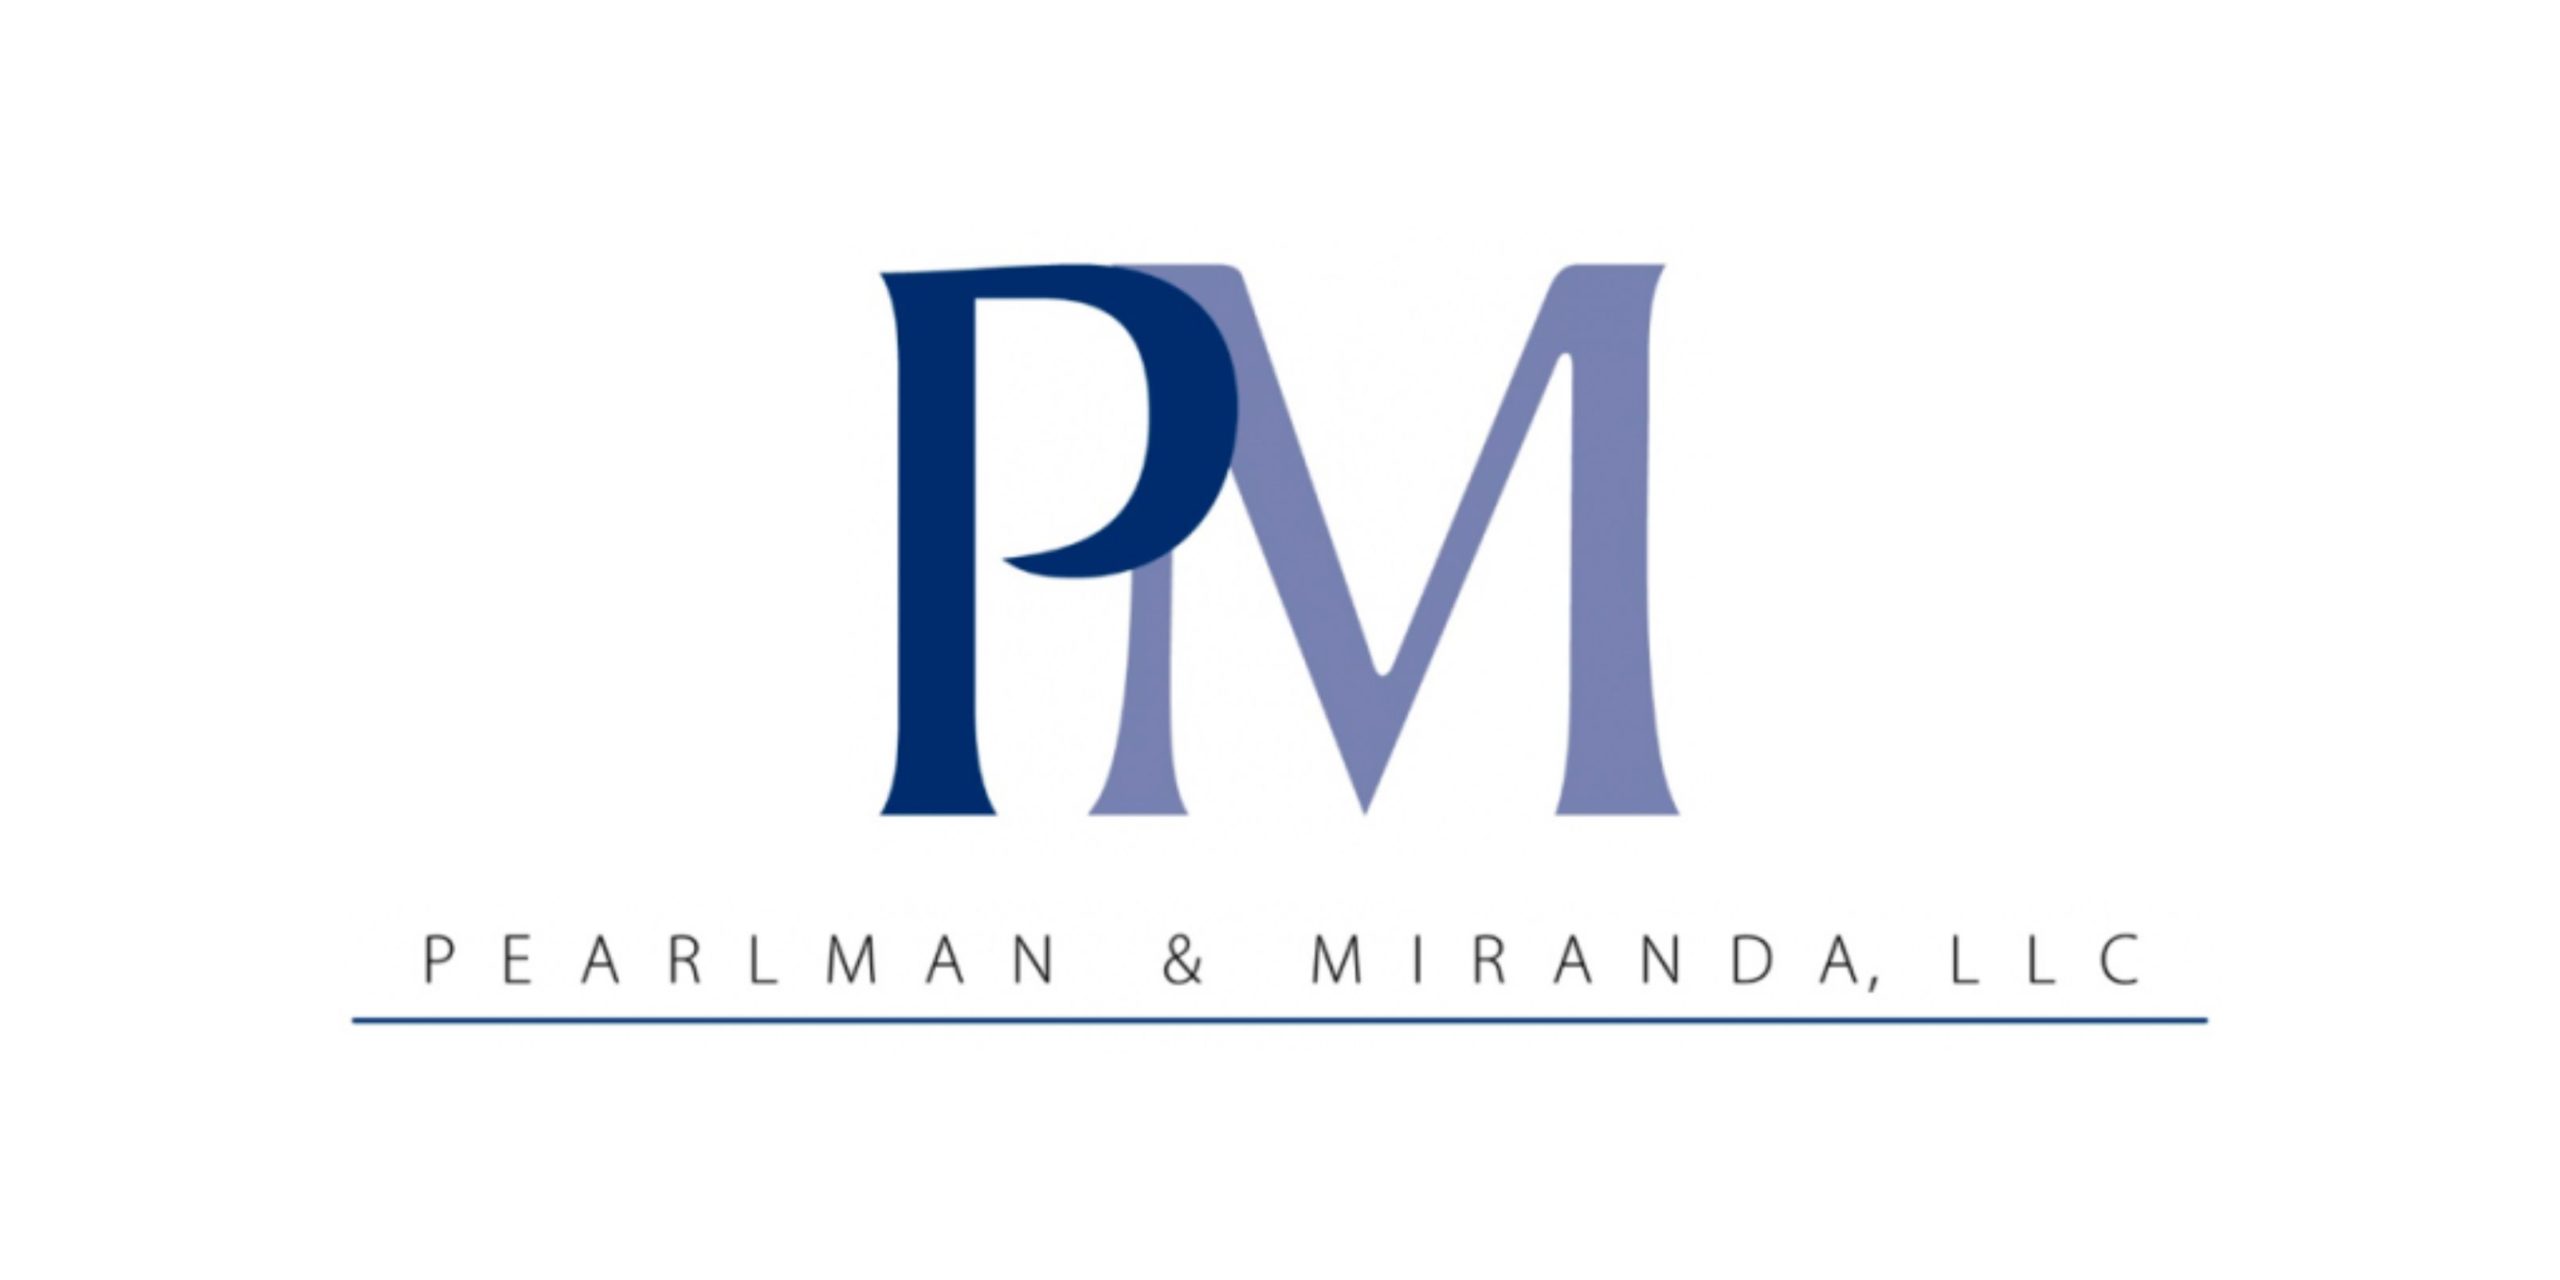 Pearlman Miranda Law Firm Moves to the Cloud with Afinety